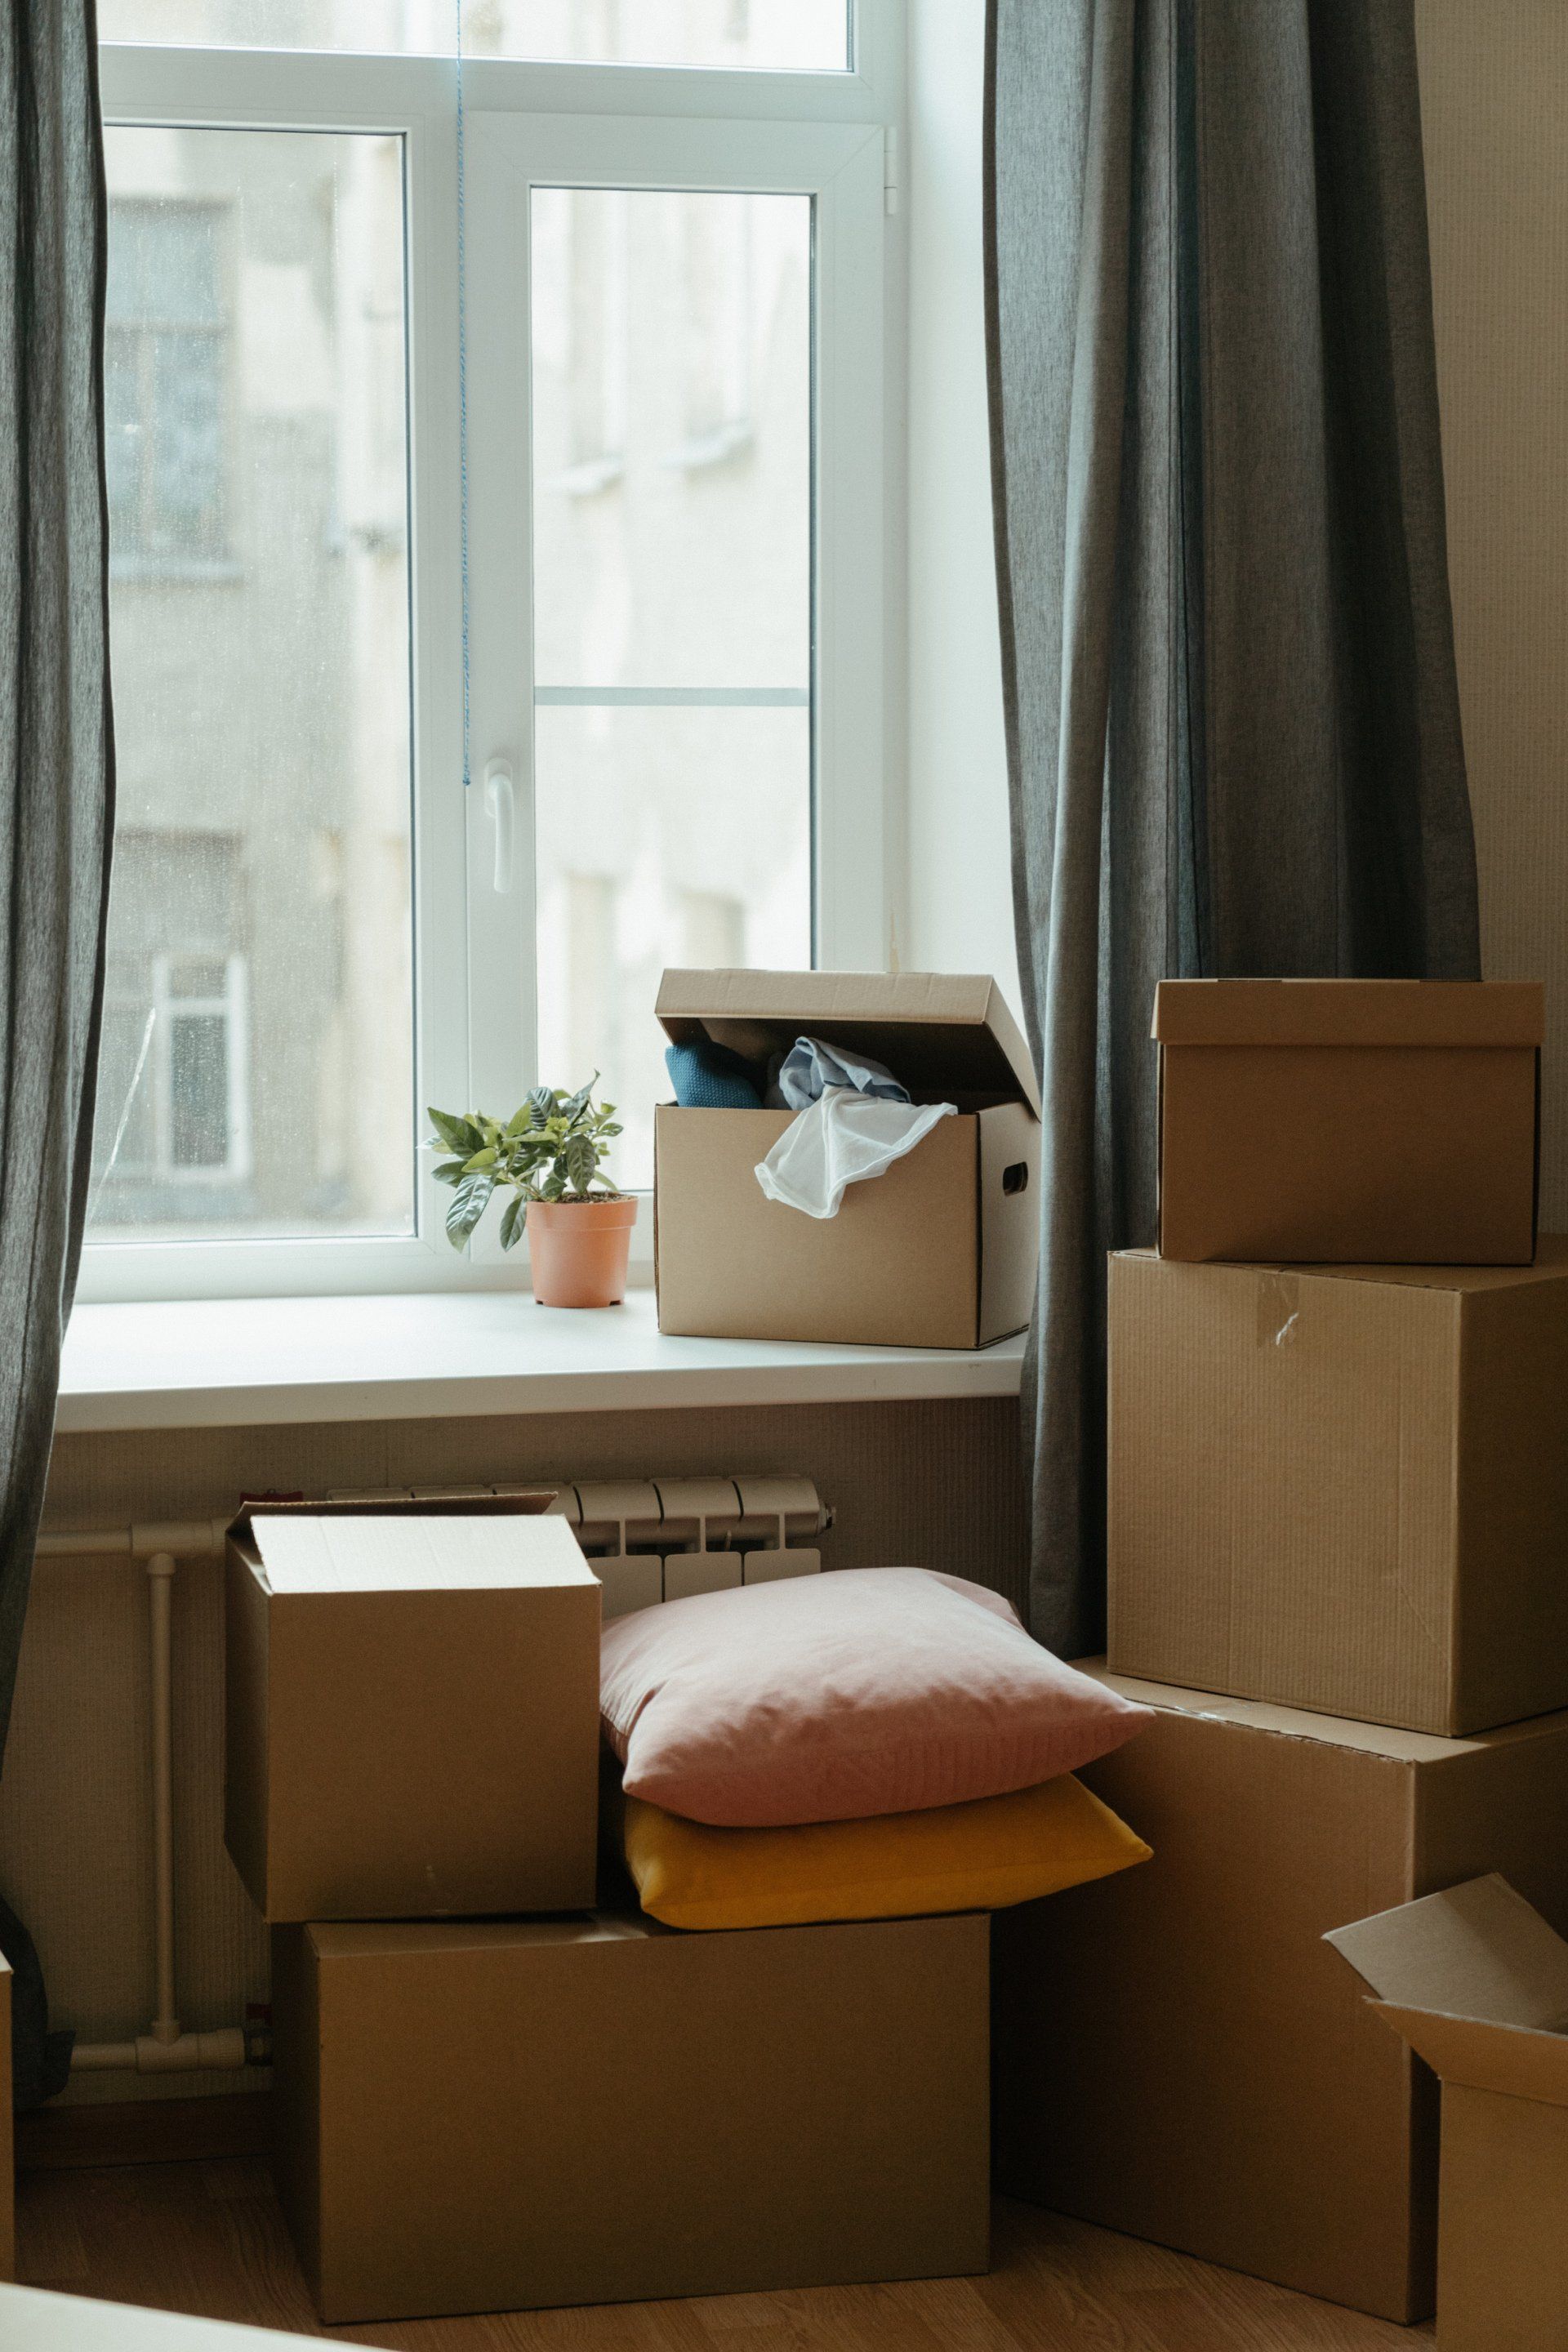 Job Relocation Made Easy: 5 Tips for Quick Cash Home Sale